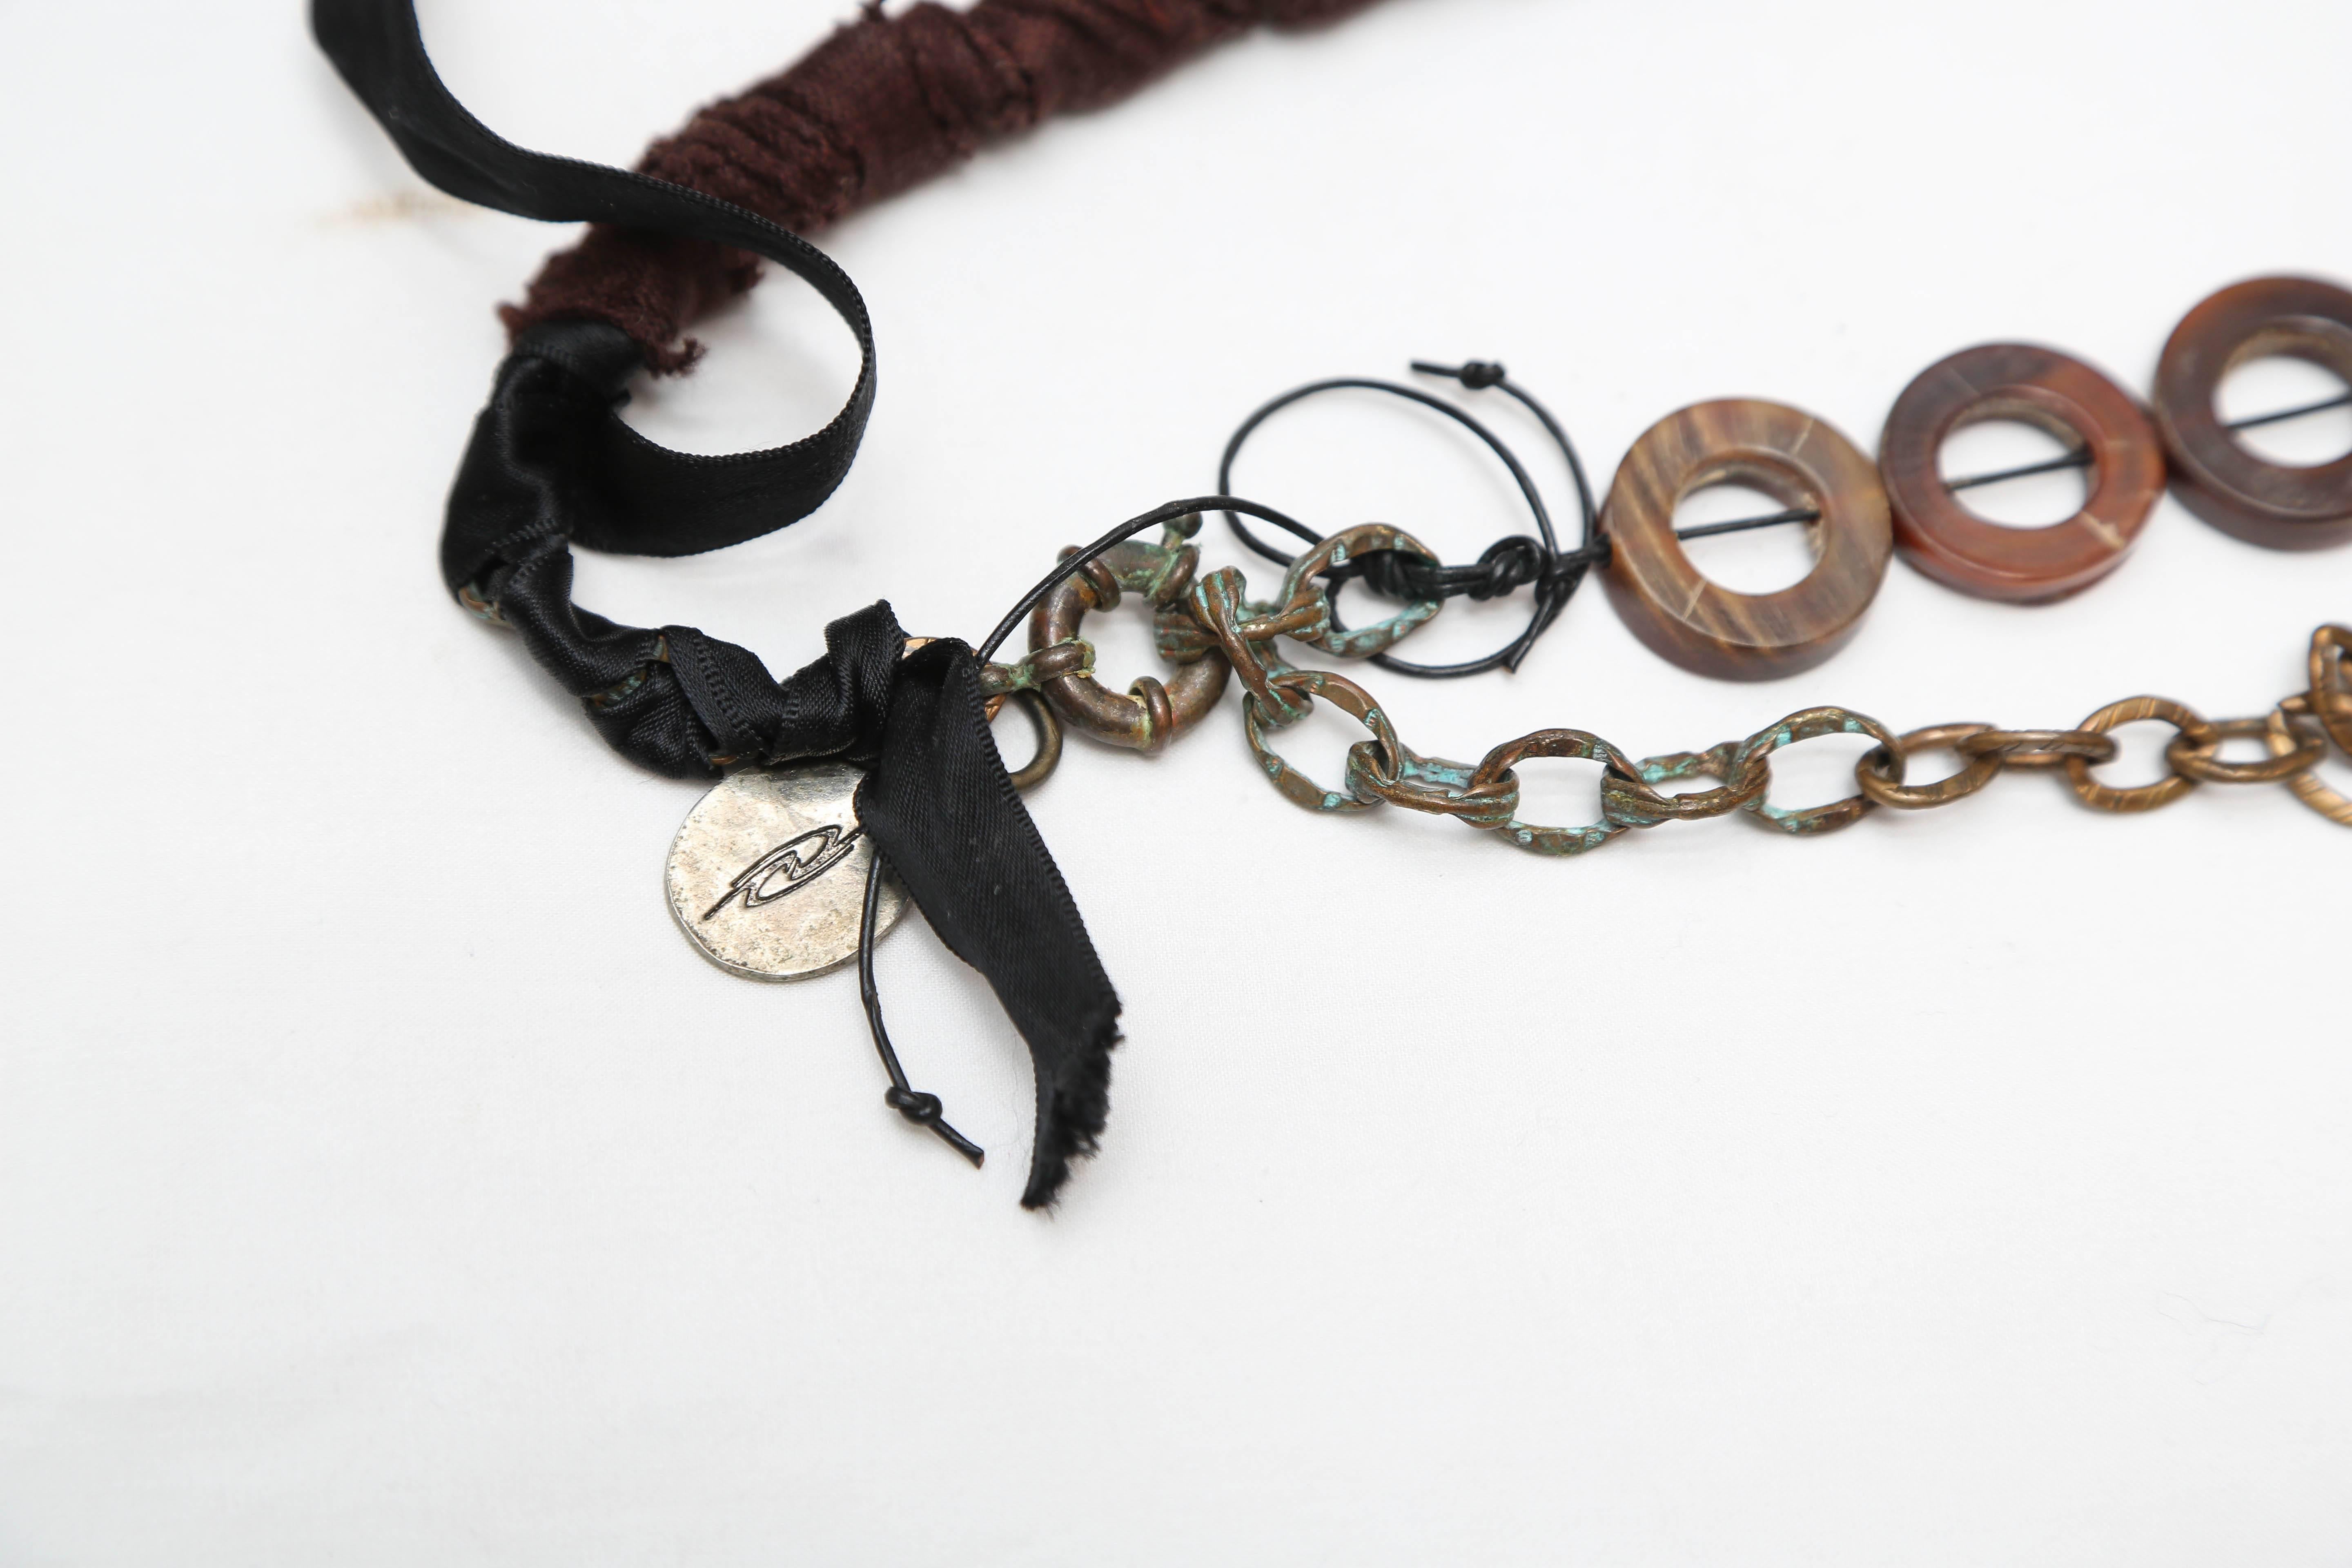 Hand-Knotted Marzia Z Jewelry Designer, Italy, Unique Necklaces, with Ethnic, Antique Symbols